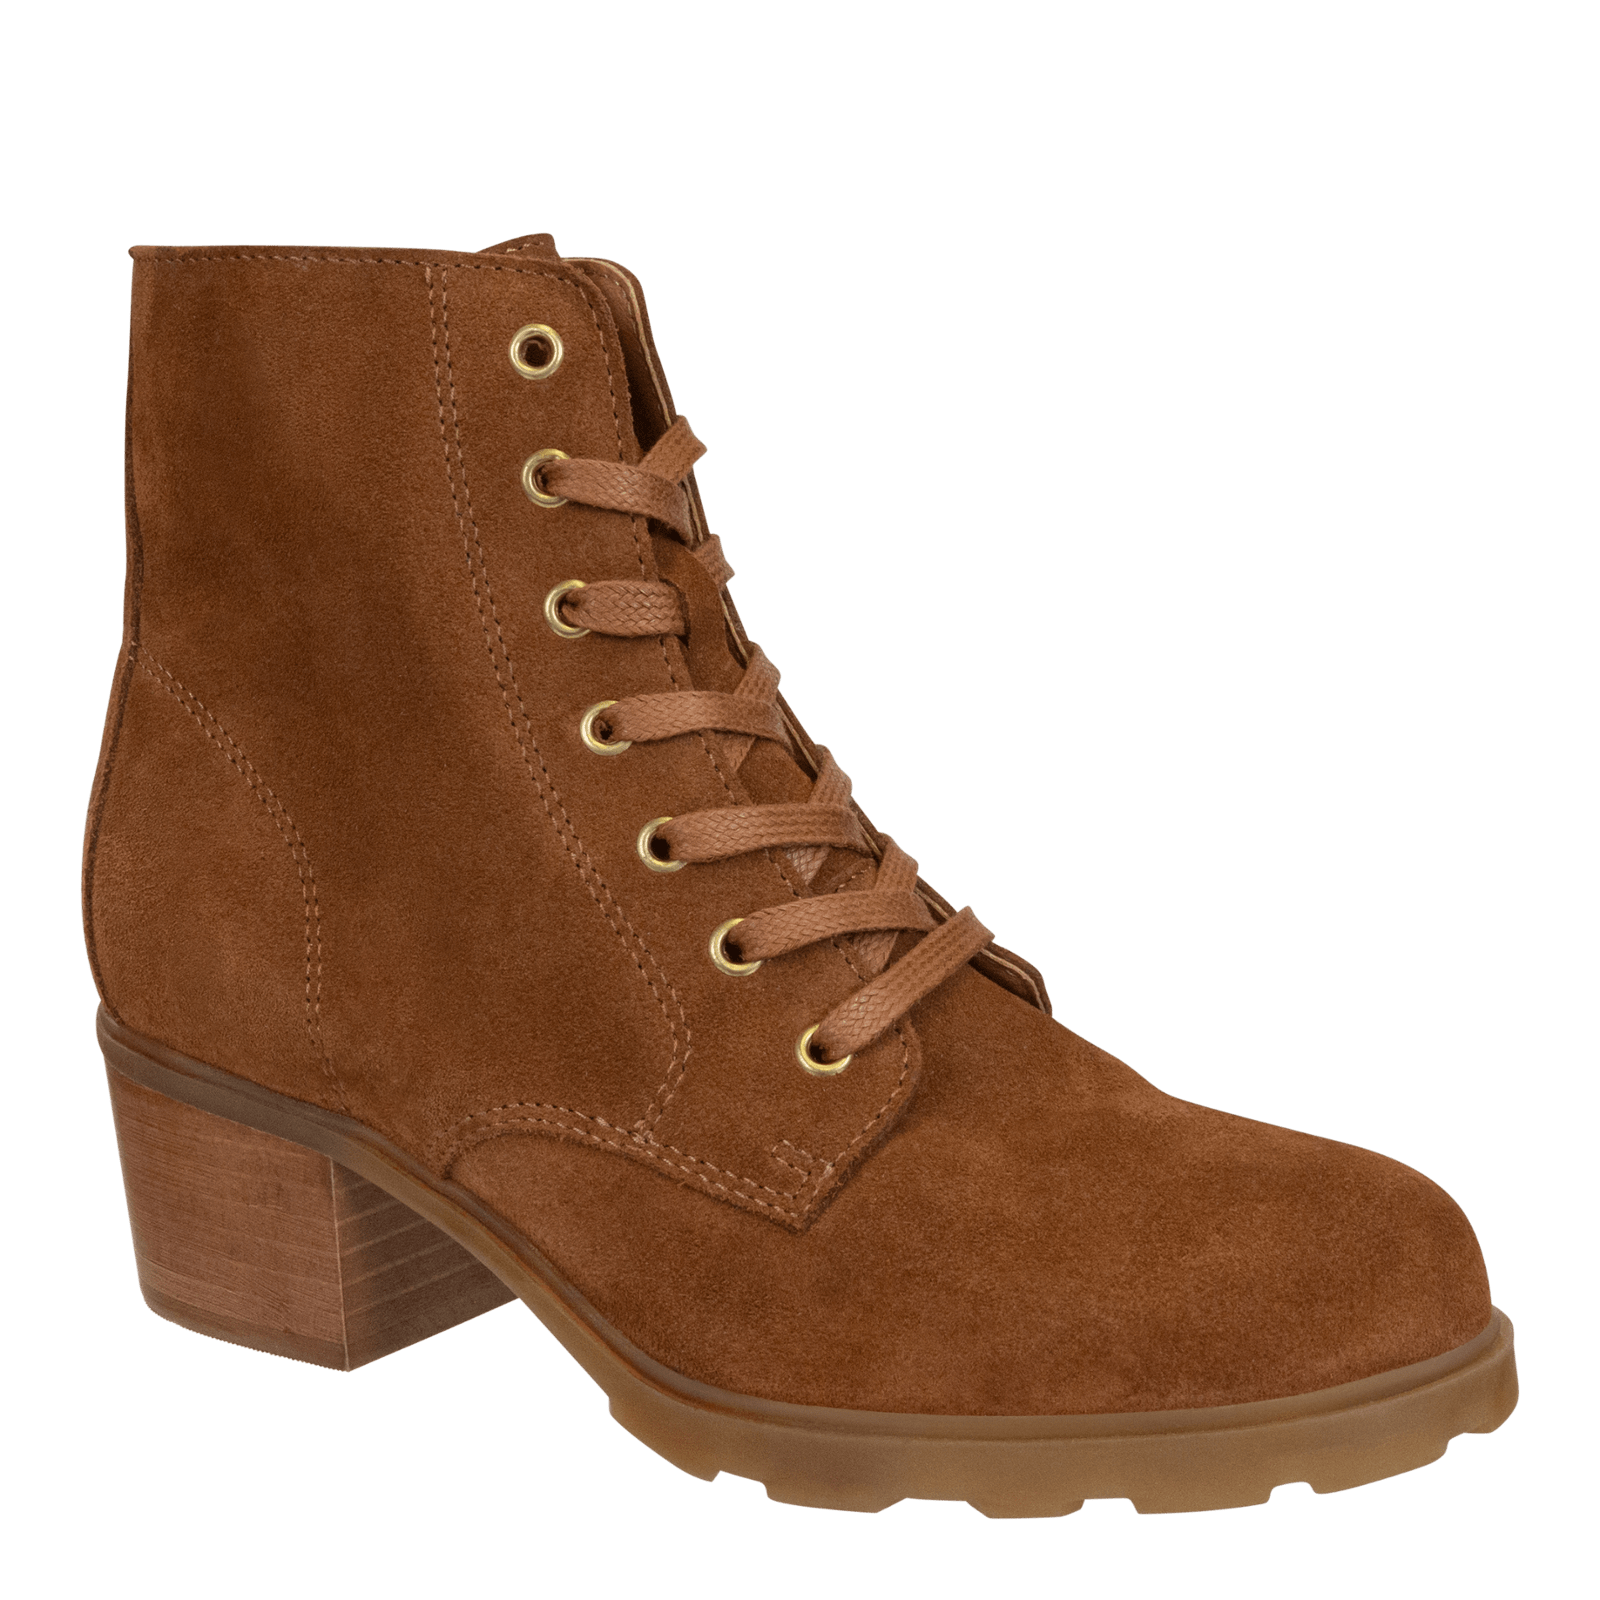 ARC in CAMEL Heeled Ankle Boots